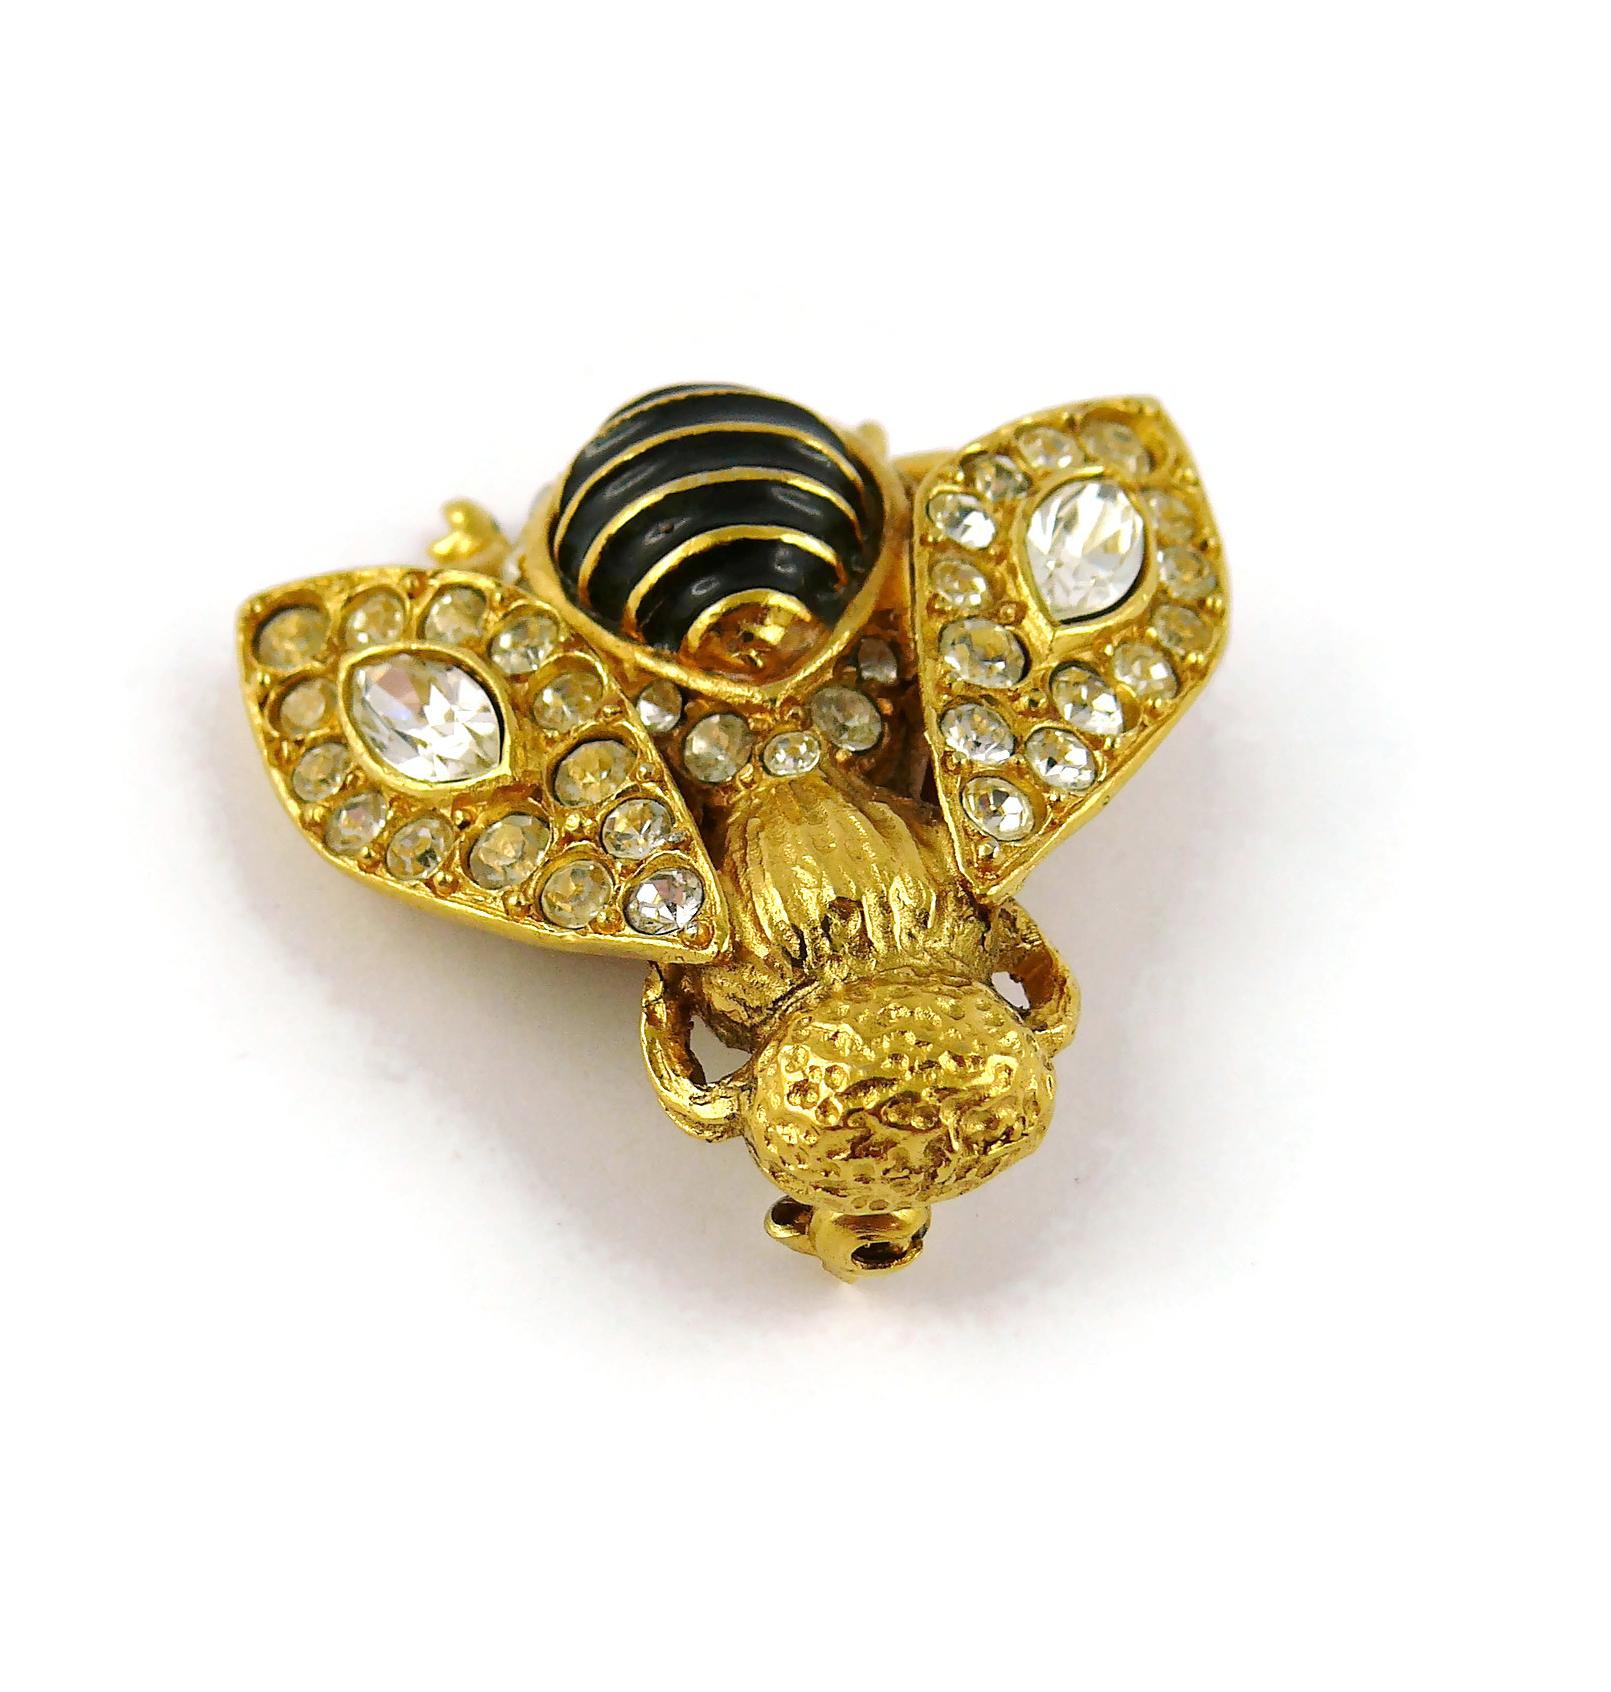 Women's Christian Dior Boutique Iconic Jewelled Bee Brooch